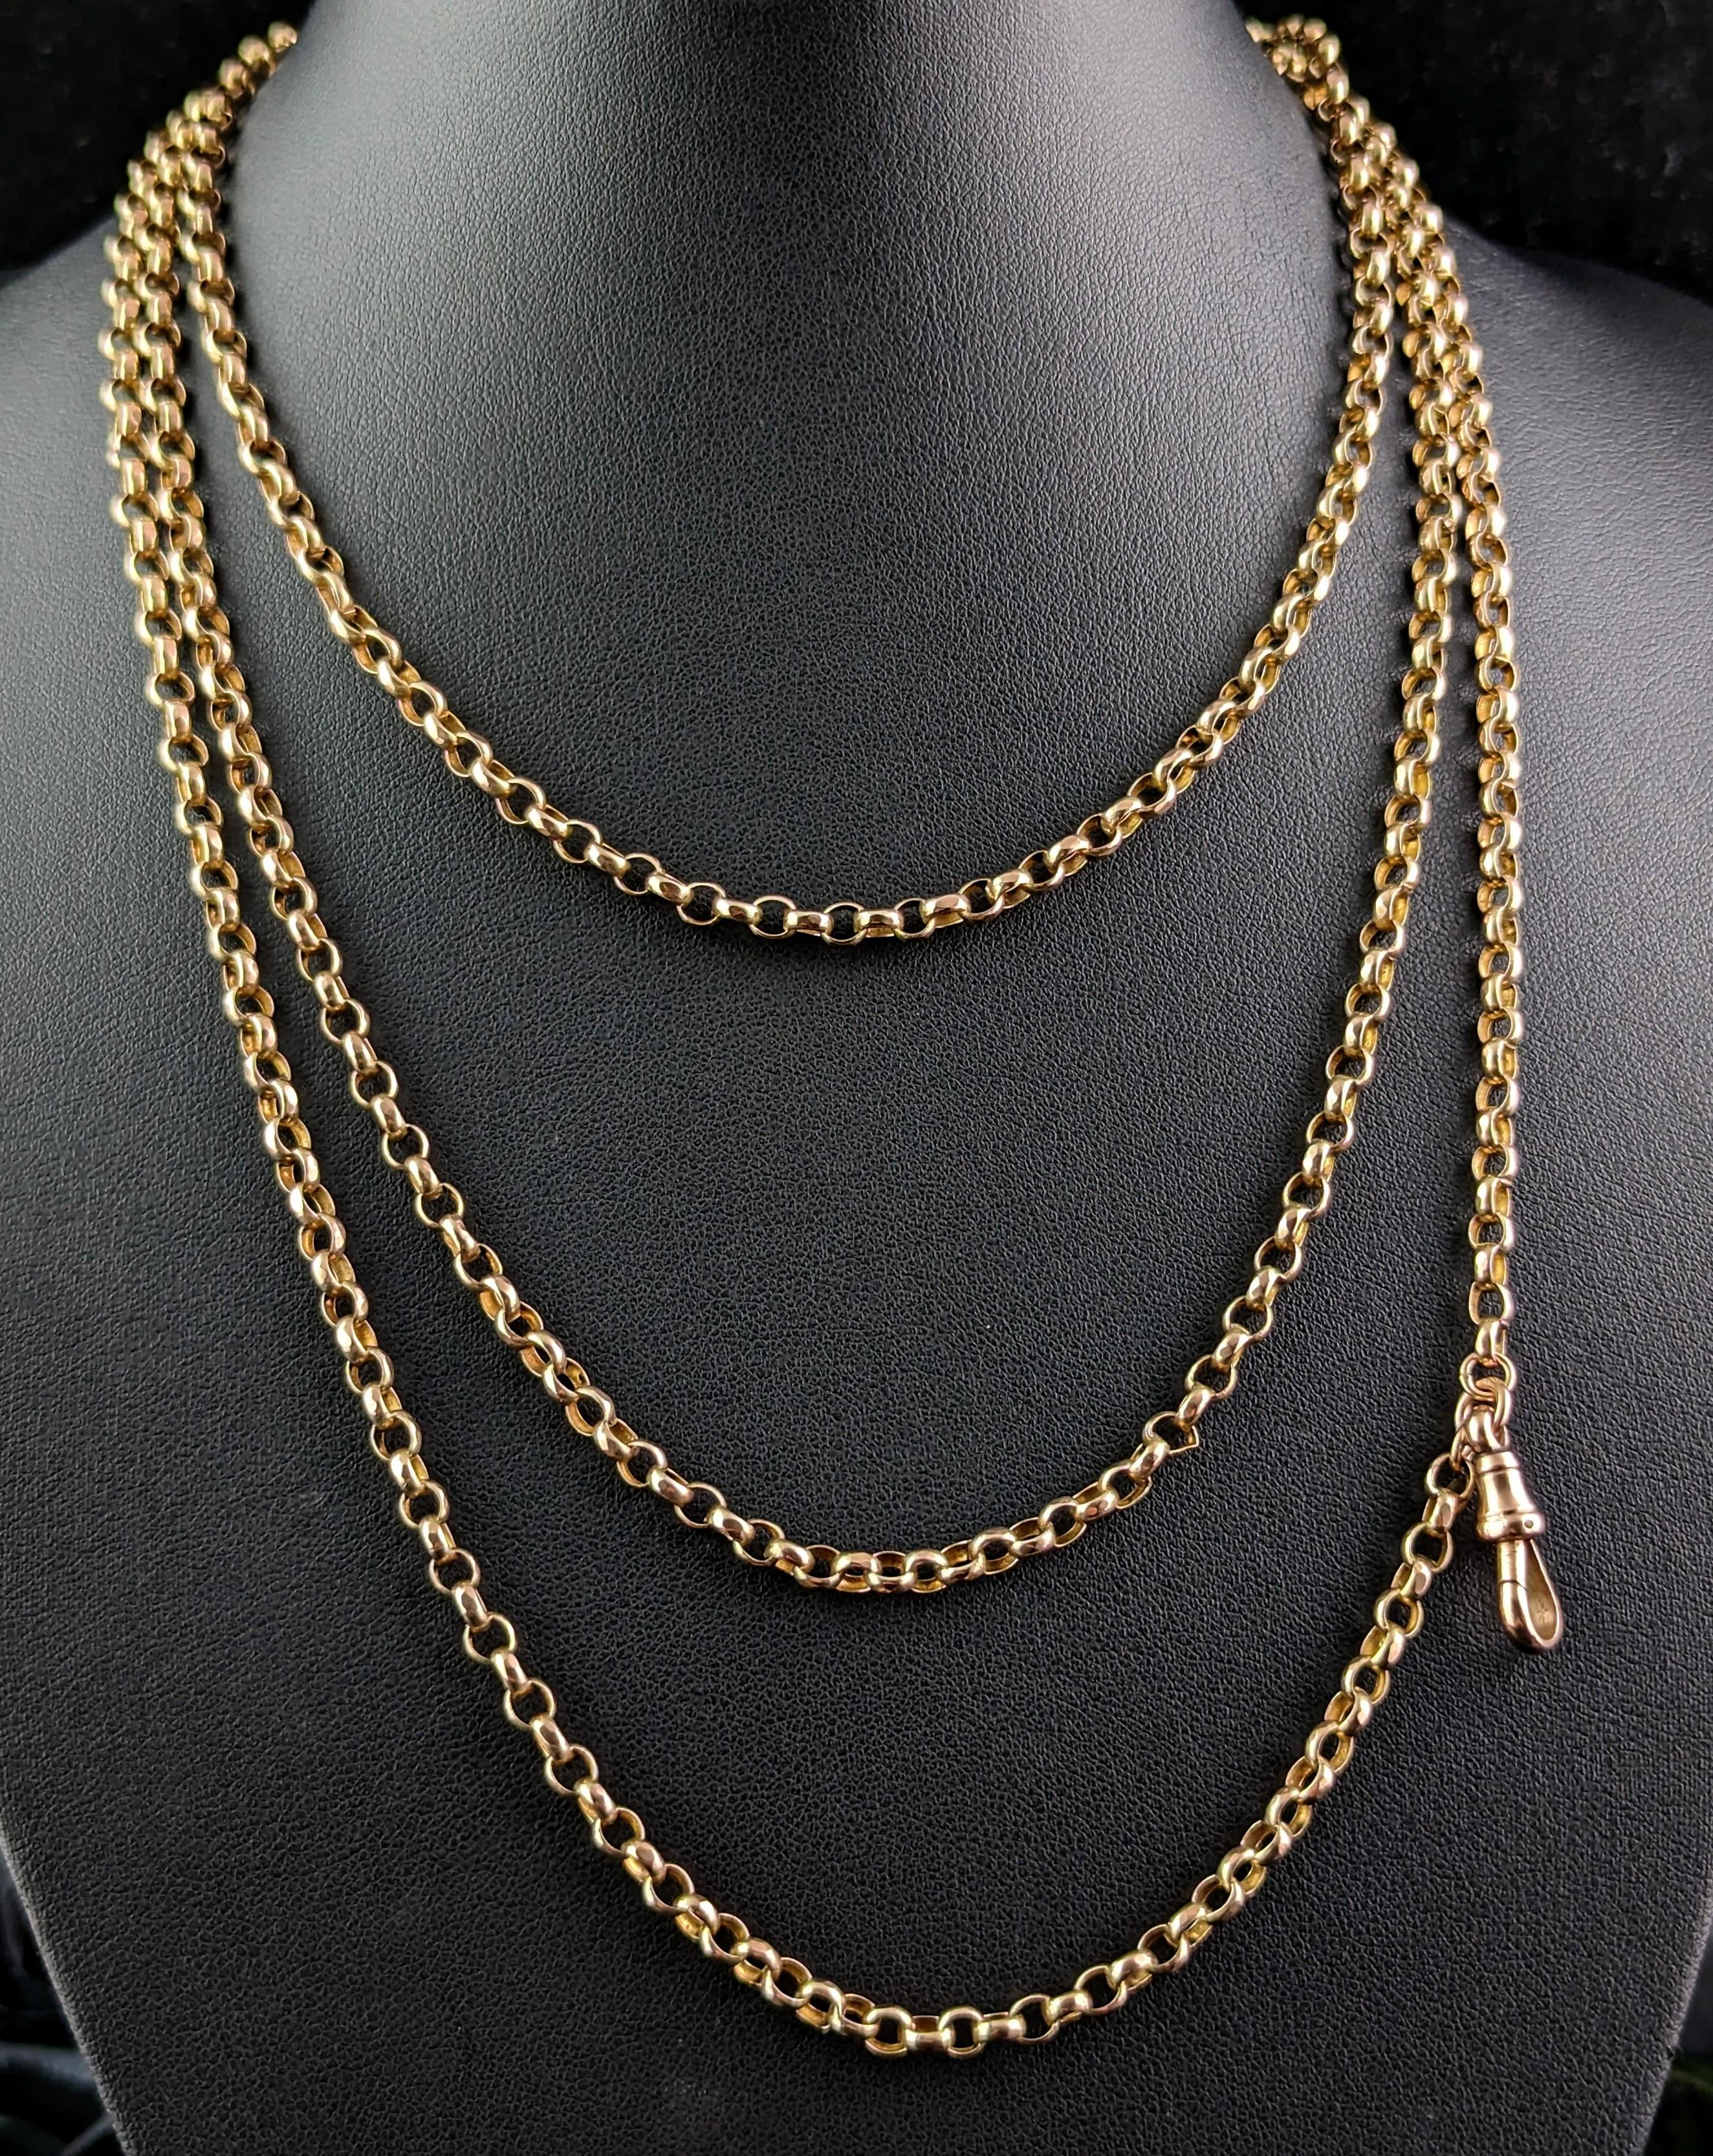 Antique 9k Gold Longuard Chain Necklace, Rolo Link, Muff Chain 2